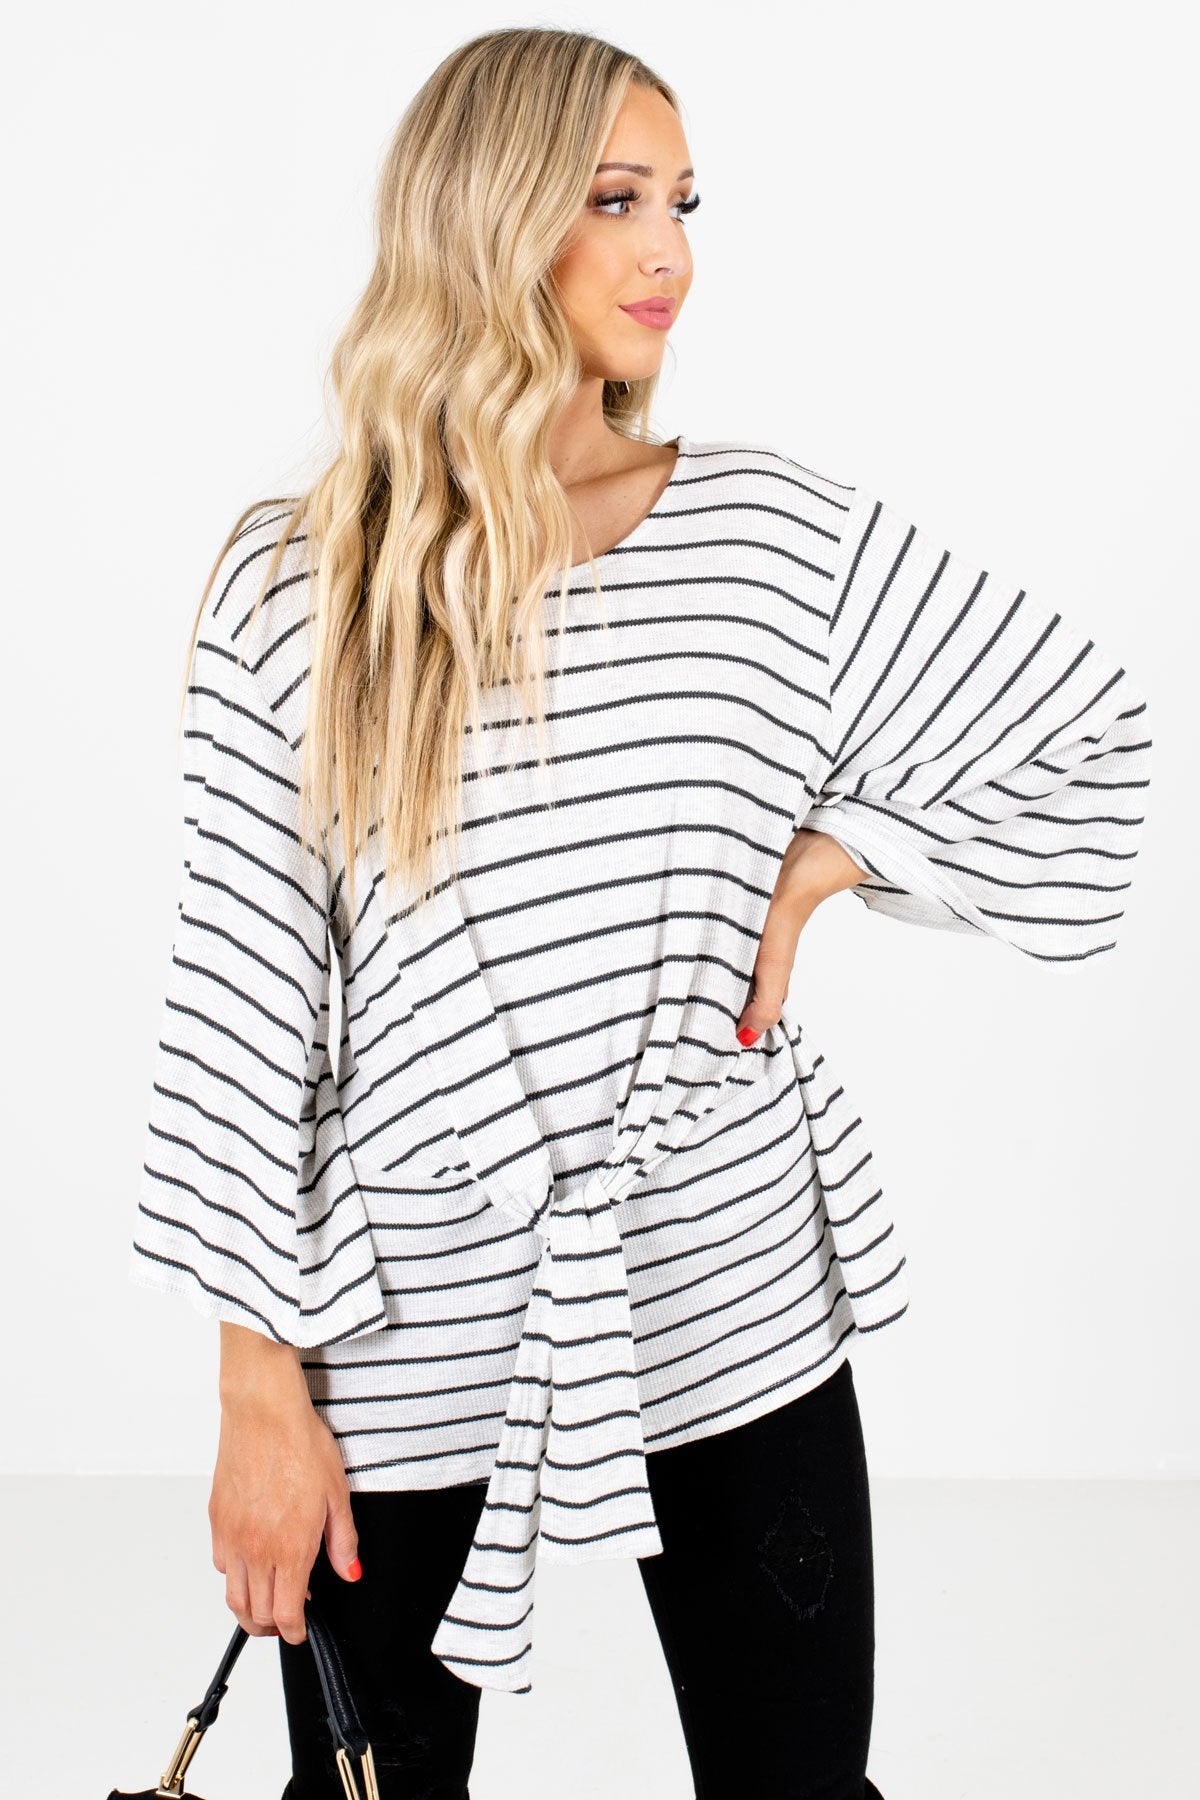 Heather Gray Striped Boutique Tops for Women